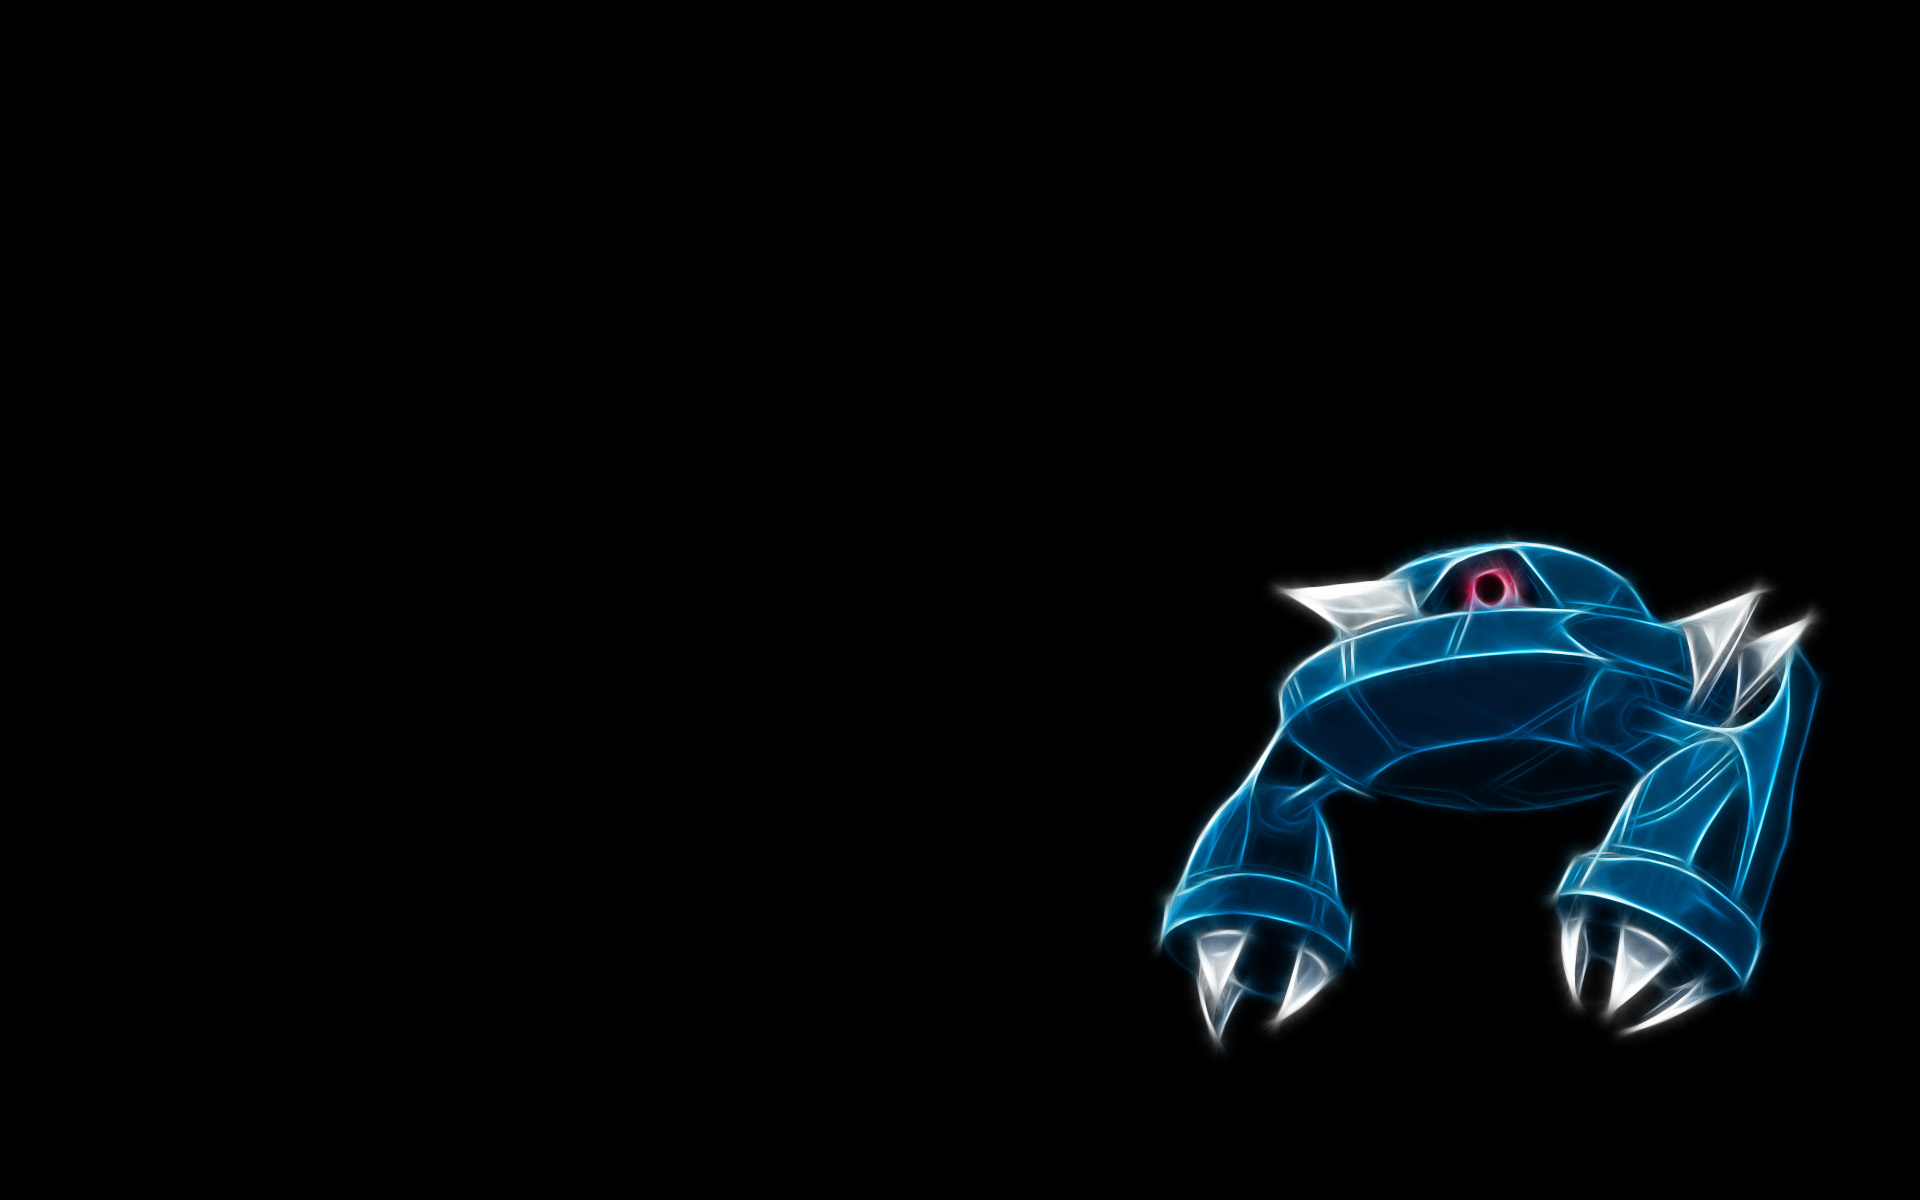 Metang, a powerful Steel Pokémon, from the world of Anime, is the focal point of this modern desktop wallpaper.